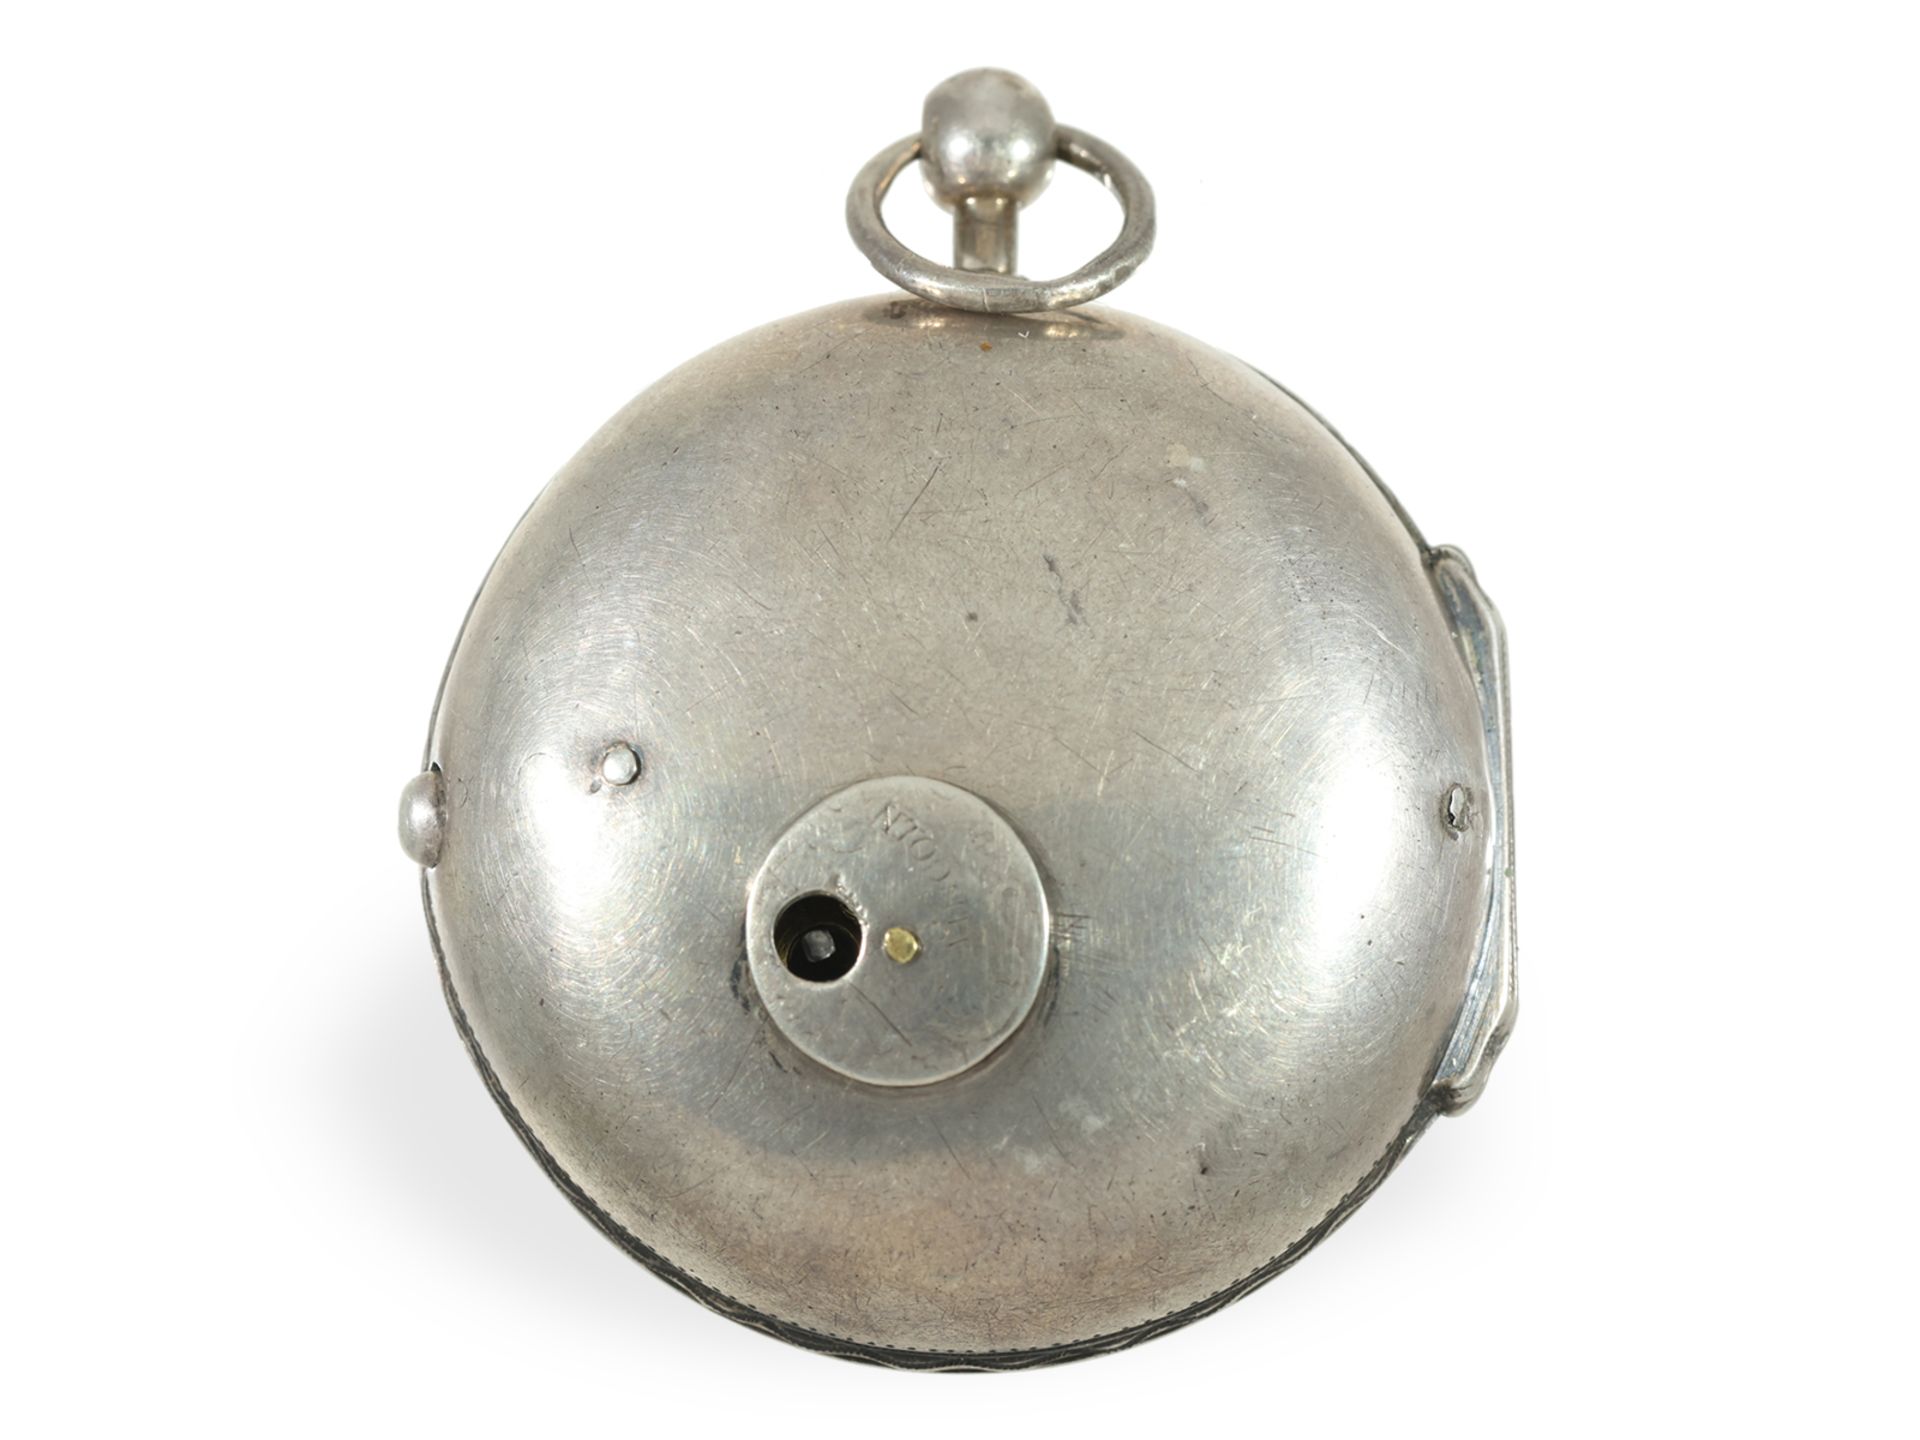 Pocket watch: museum astronomical verge watch with 6 complications, R. Jarrett London around 1690 - Image 2 of 5